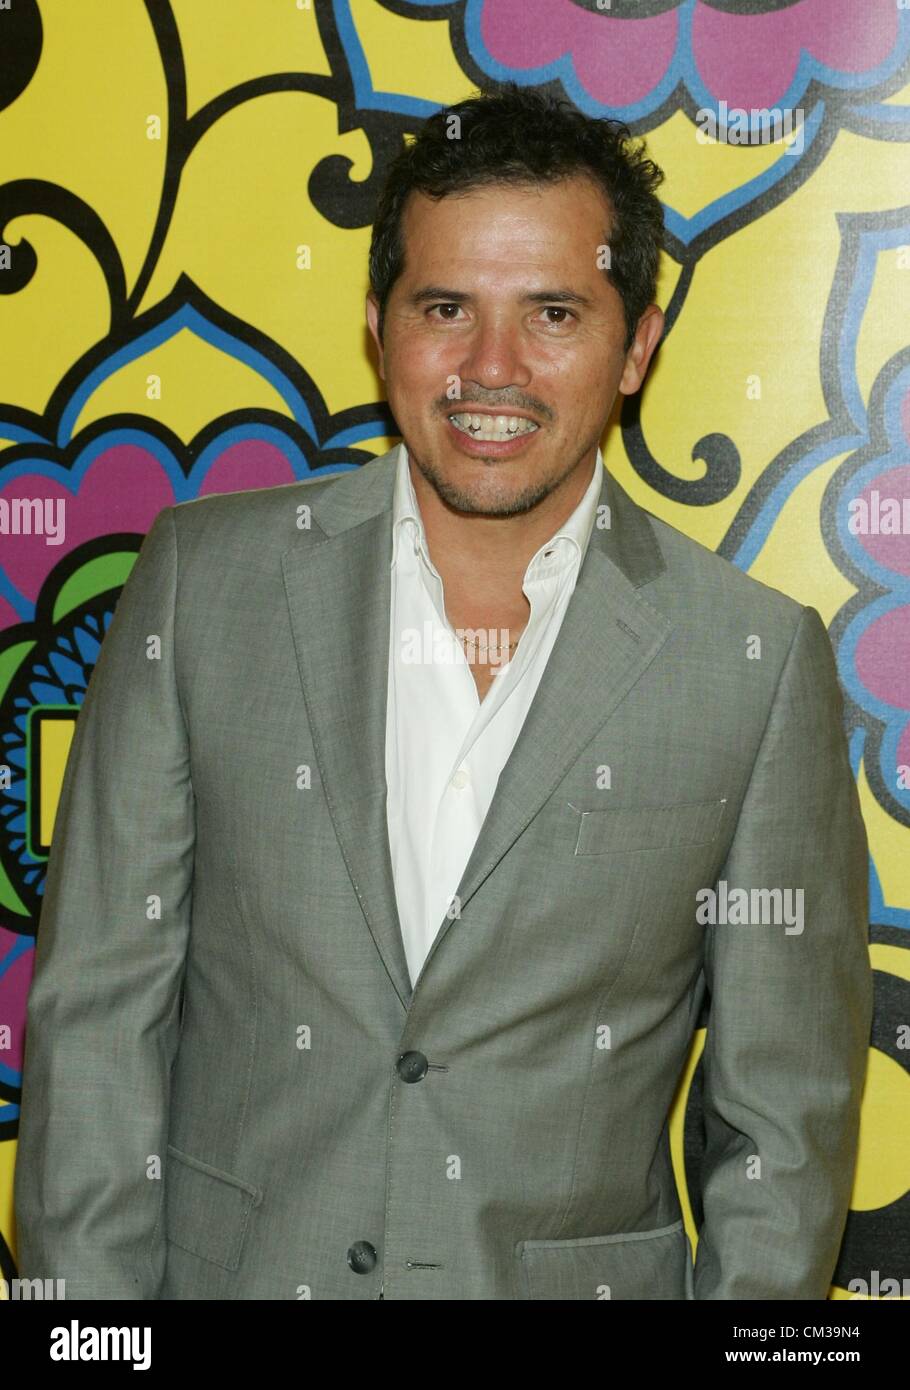 John Leguizamo arrivals HBO Emmy Awards After Party - PART 2Plaza atPacific Design Center Los Angeles CA September 23 2012 Stock Photo